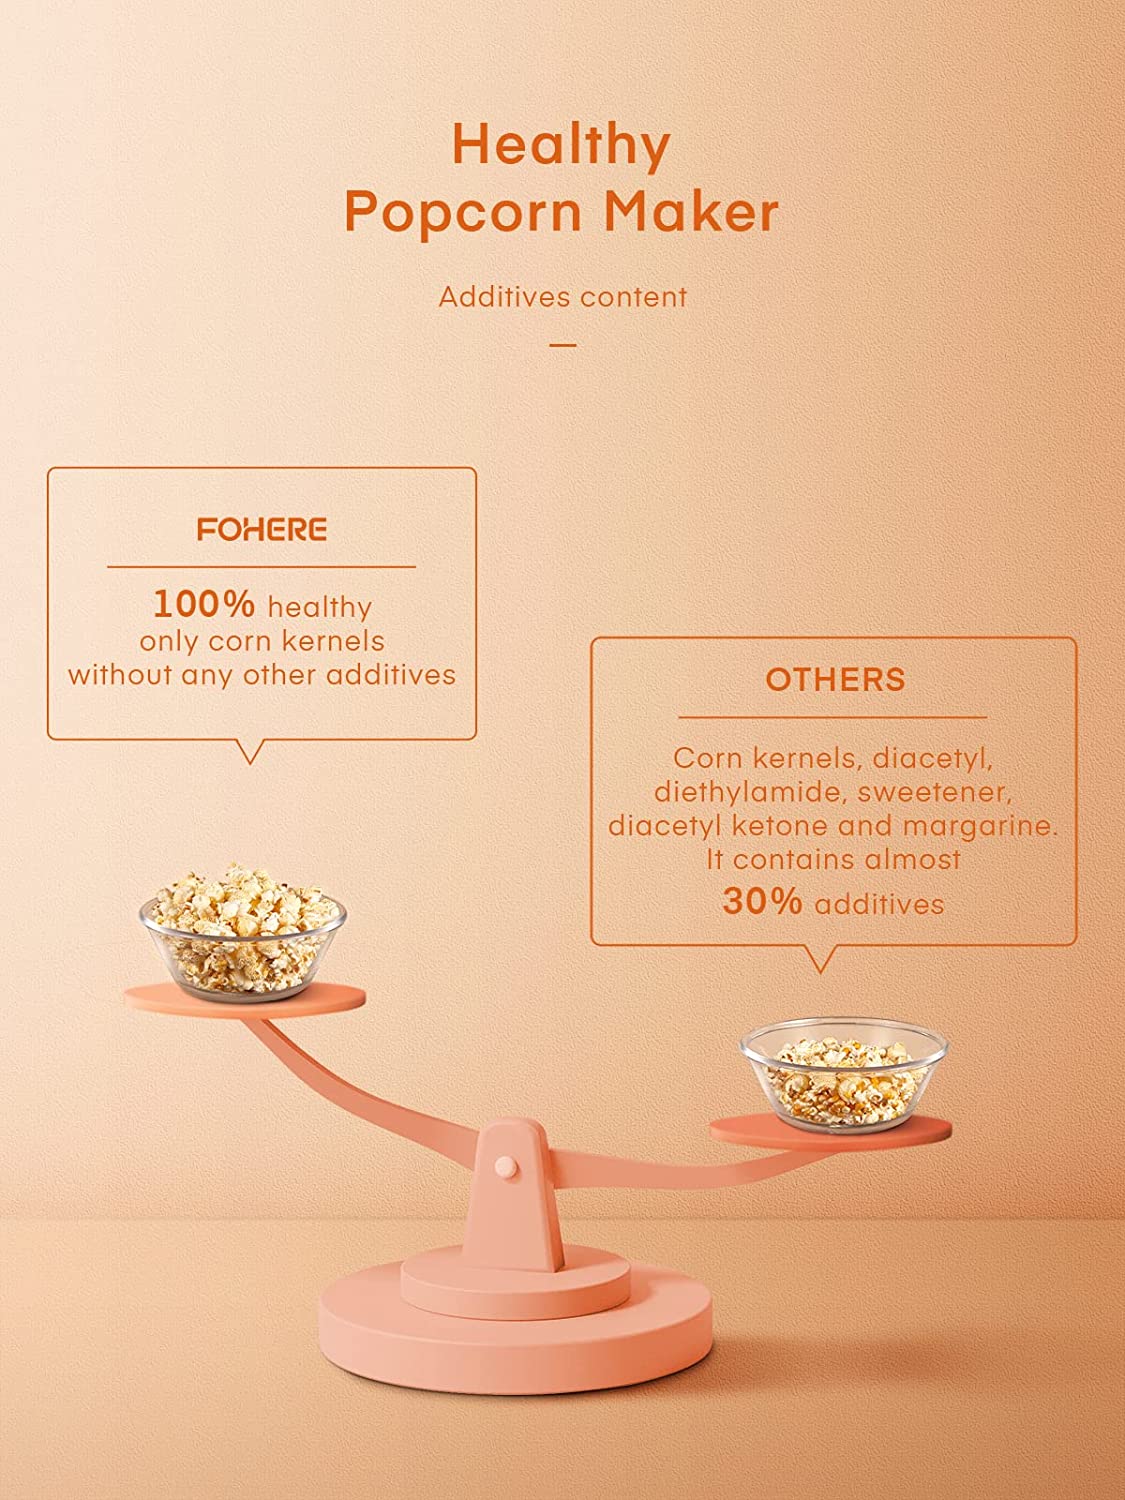 healthy popcorn, FOHERE 1400W Hot Air Popcorn Maker, 18 Cups/4.5 Quart, Popcorn Popper with Measuring Cup, 2min Fast Popping, Electric Pop Corn Maker, Quick Snack, No Oil Needed